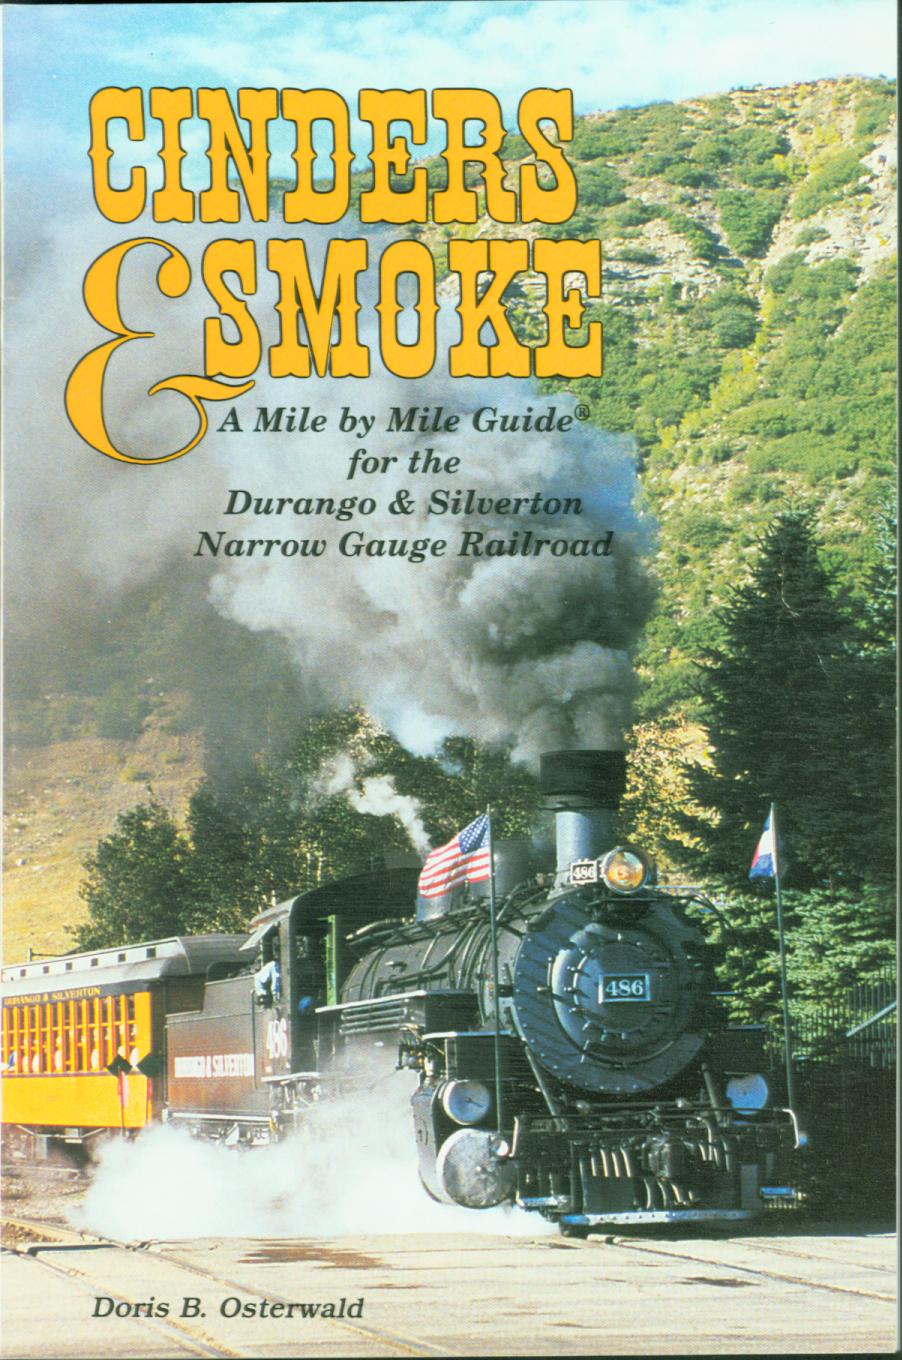 INDERS & SMOKE: a mile by mile guide for the Durango & Silverton Narrow Gauge Railroads.